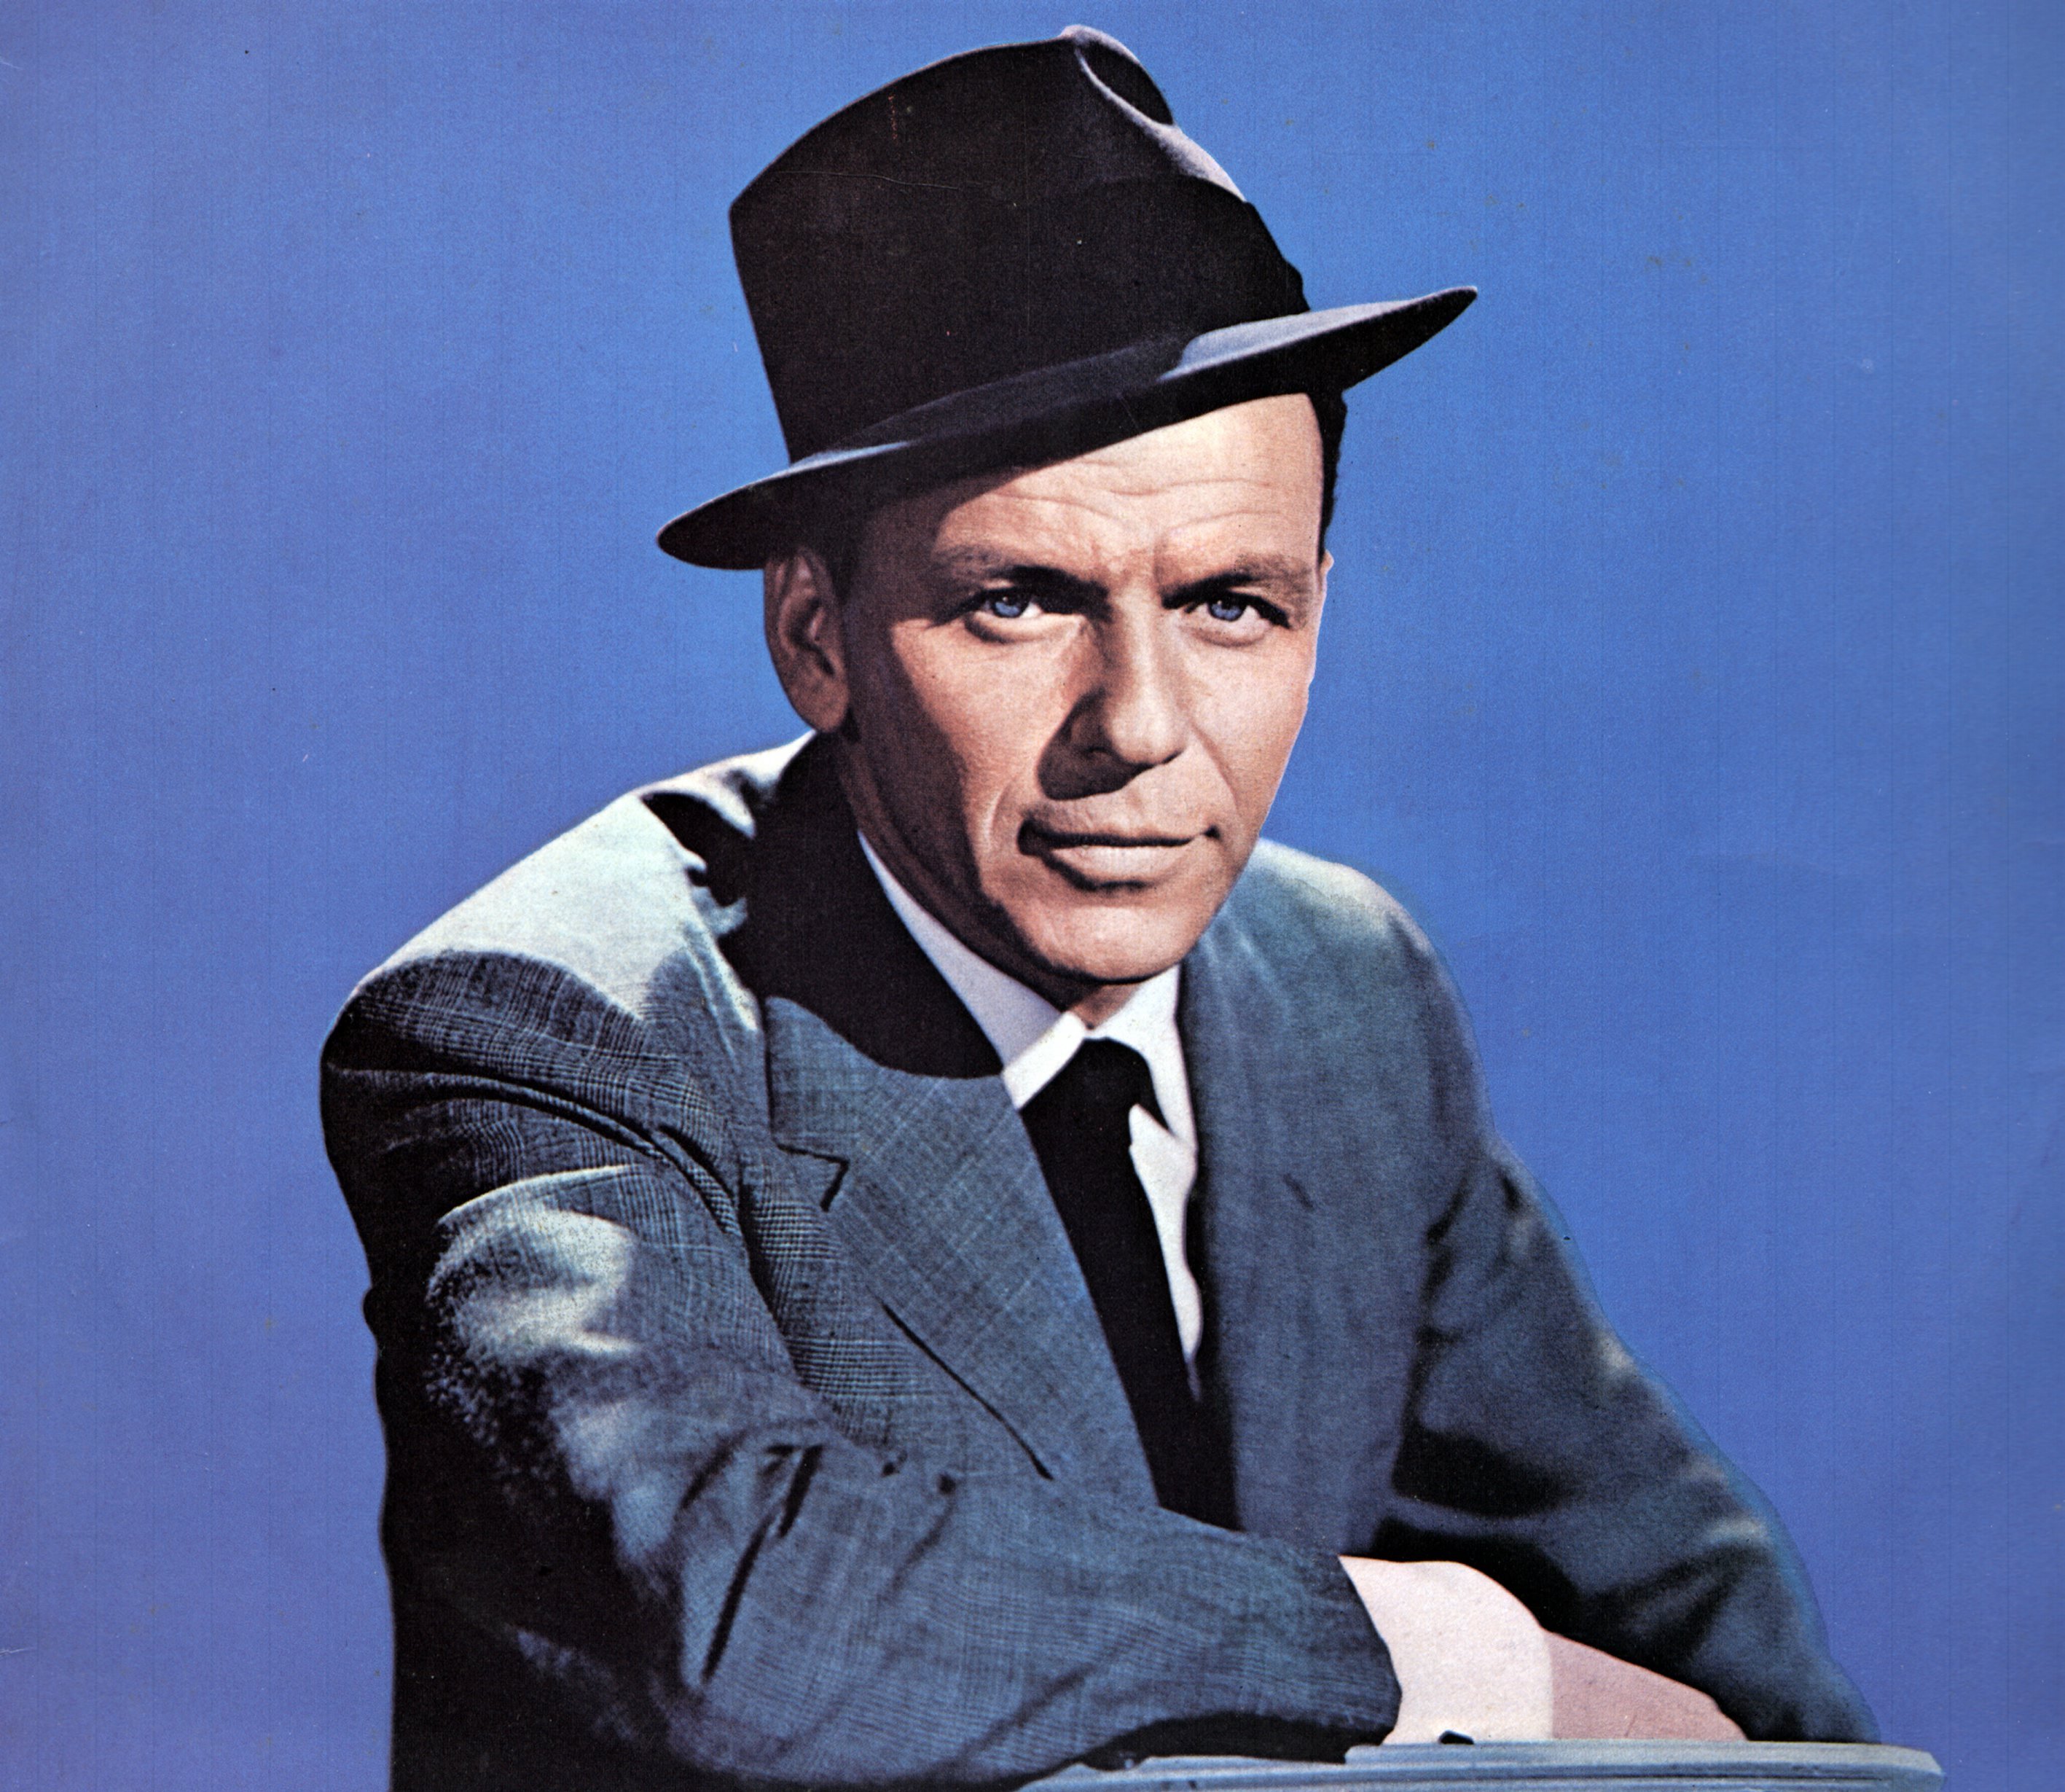 Frank Sinatra wears a hat and a suit and sits in front of a blue background.